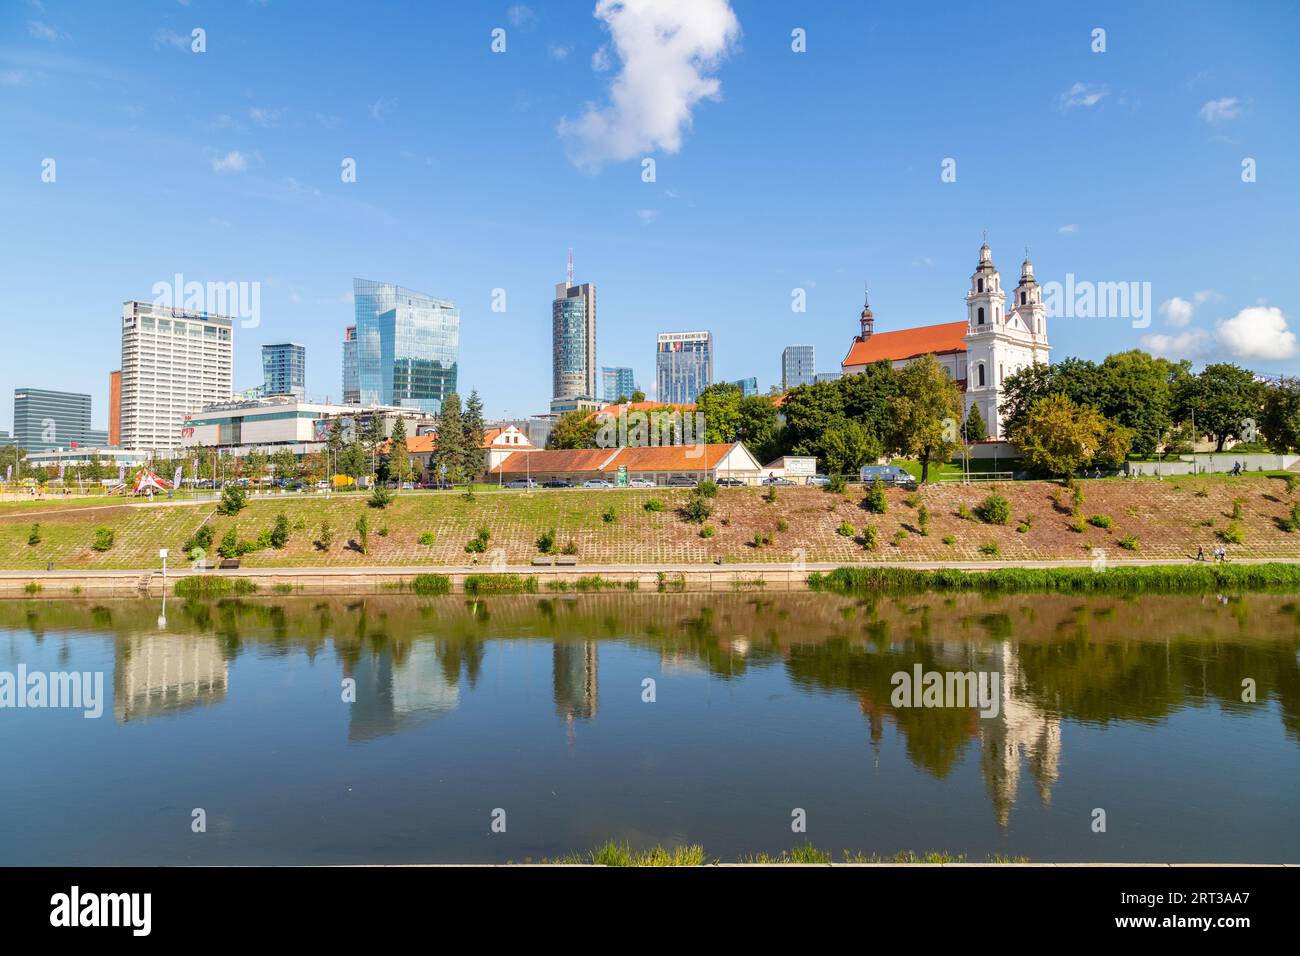 VILNIUS, LITHUANIA - 3RD SEPT 2023: A view across the Neris River showing buildings and architecture in central Vilnius. Stock Photo